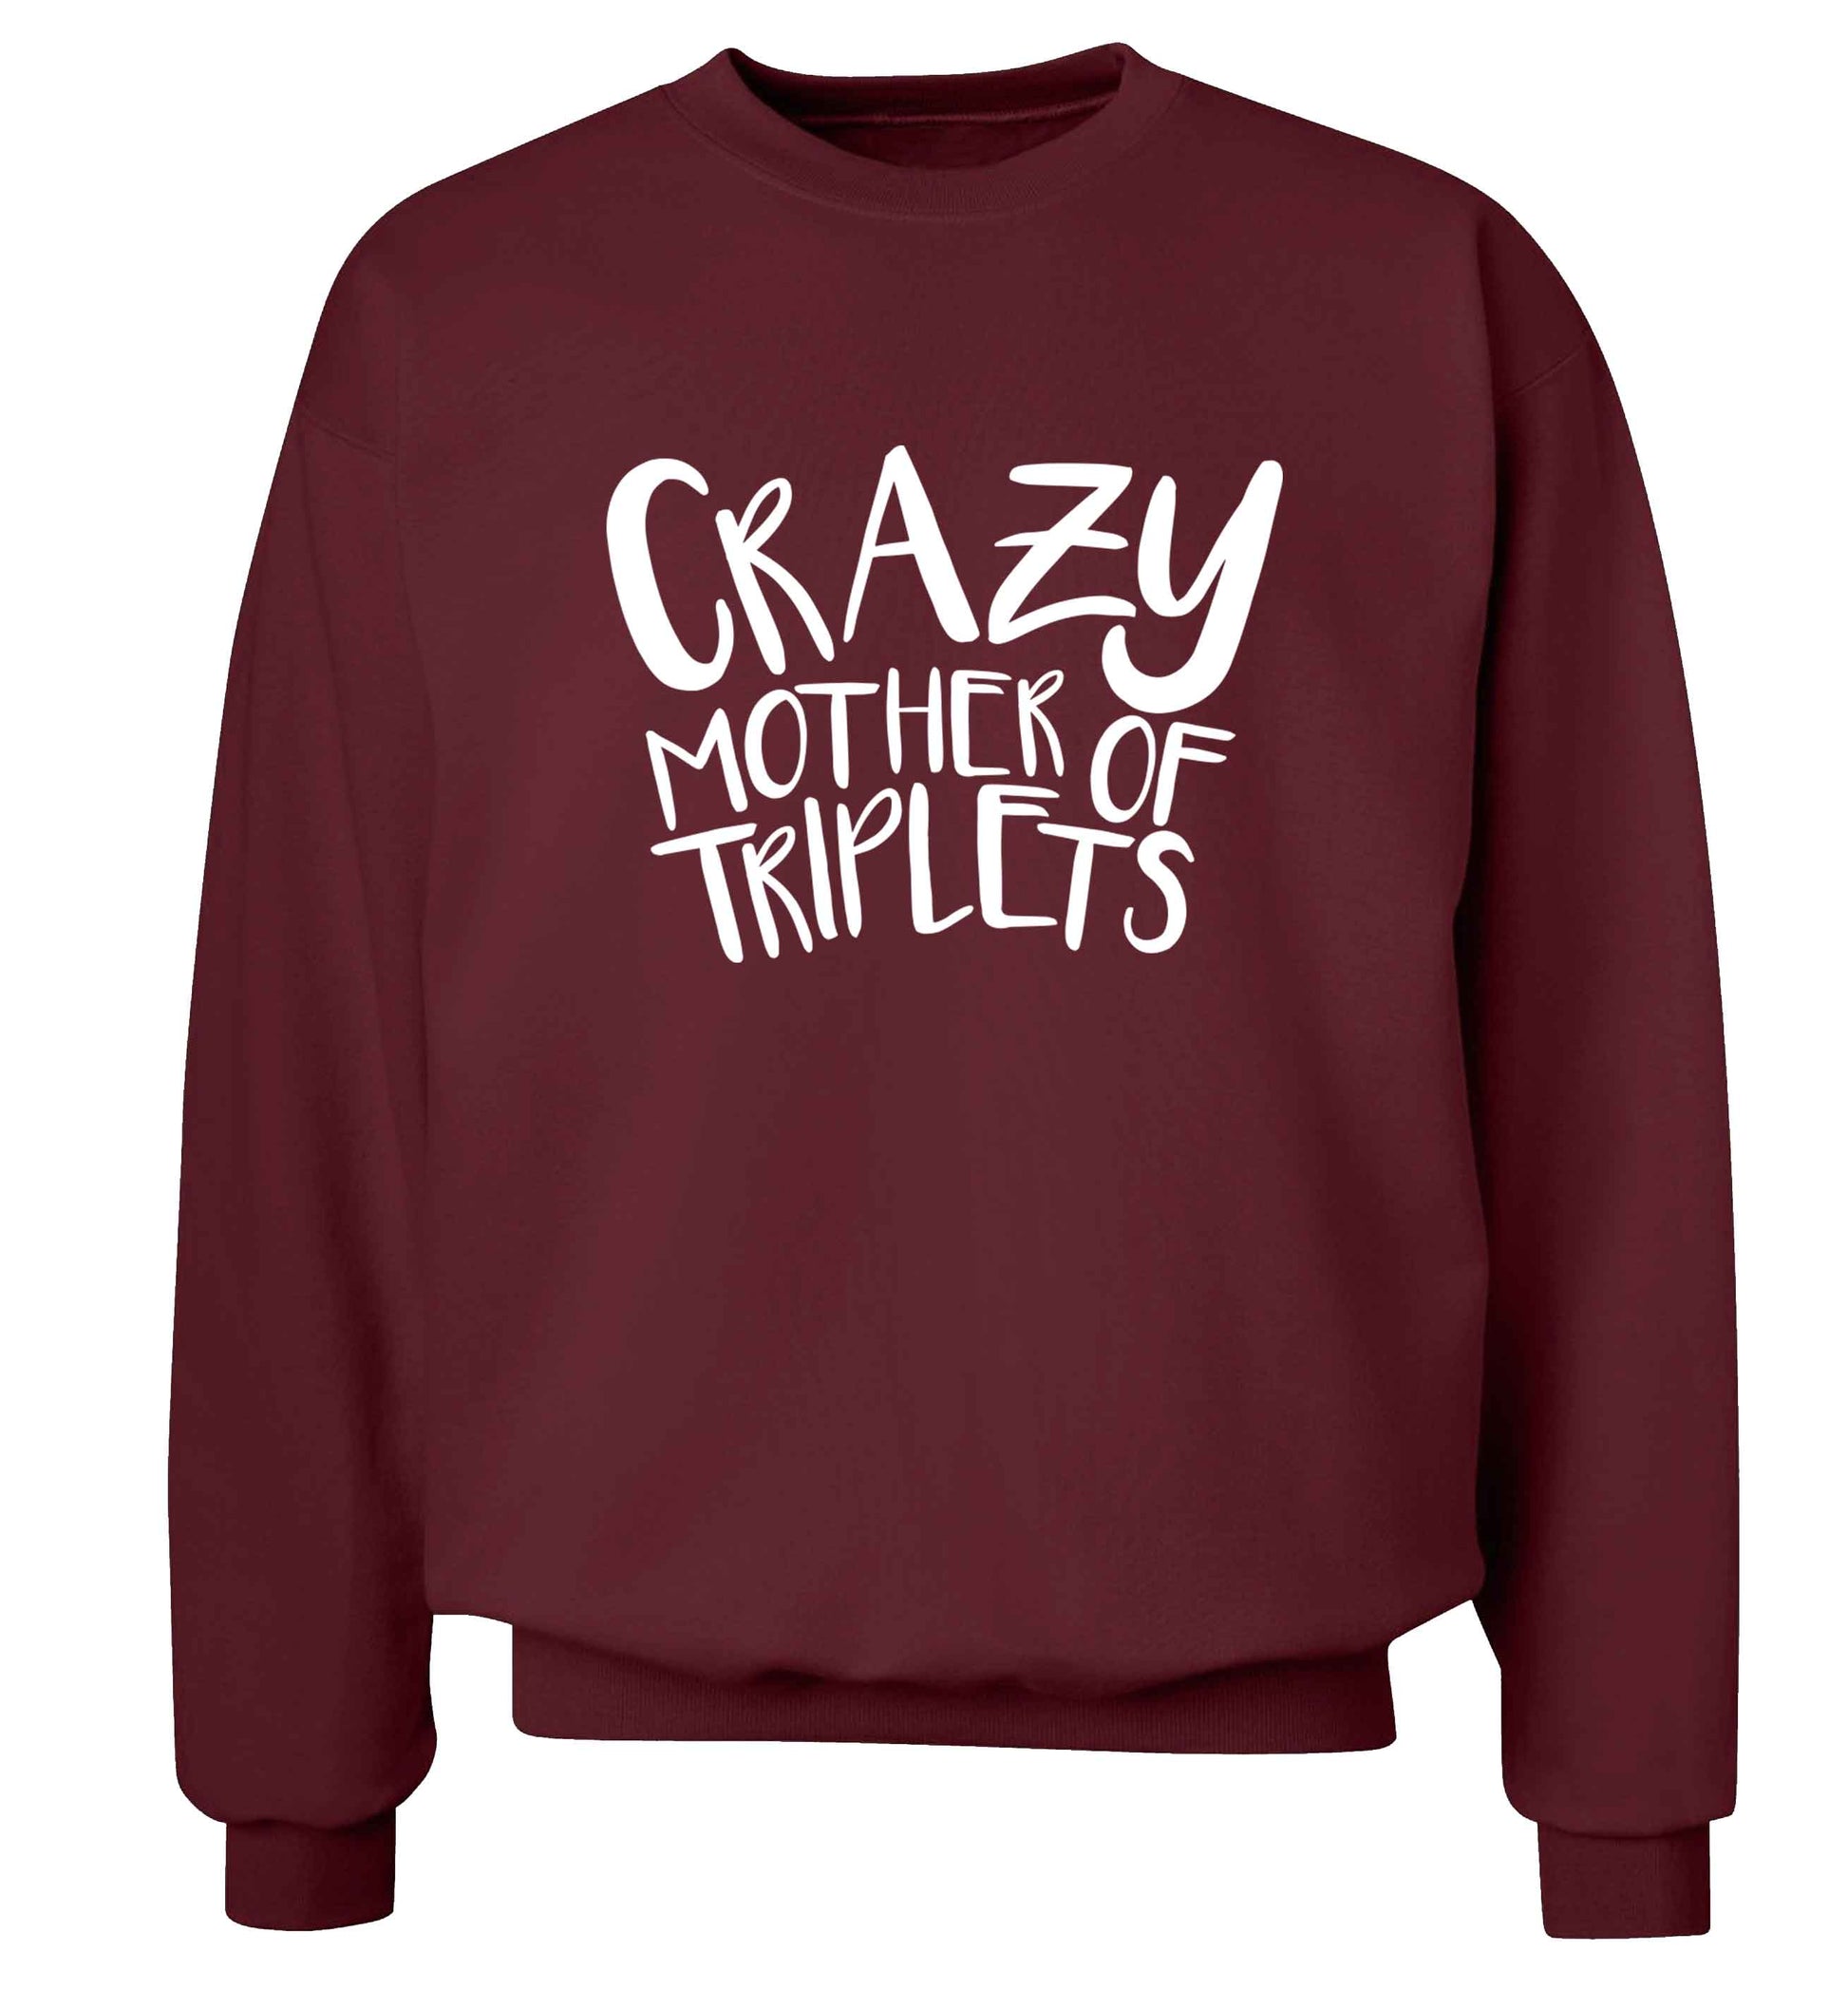 Crazy mother of triplets adult's unisex maroon sweater 2XL